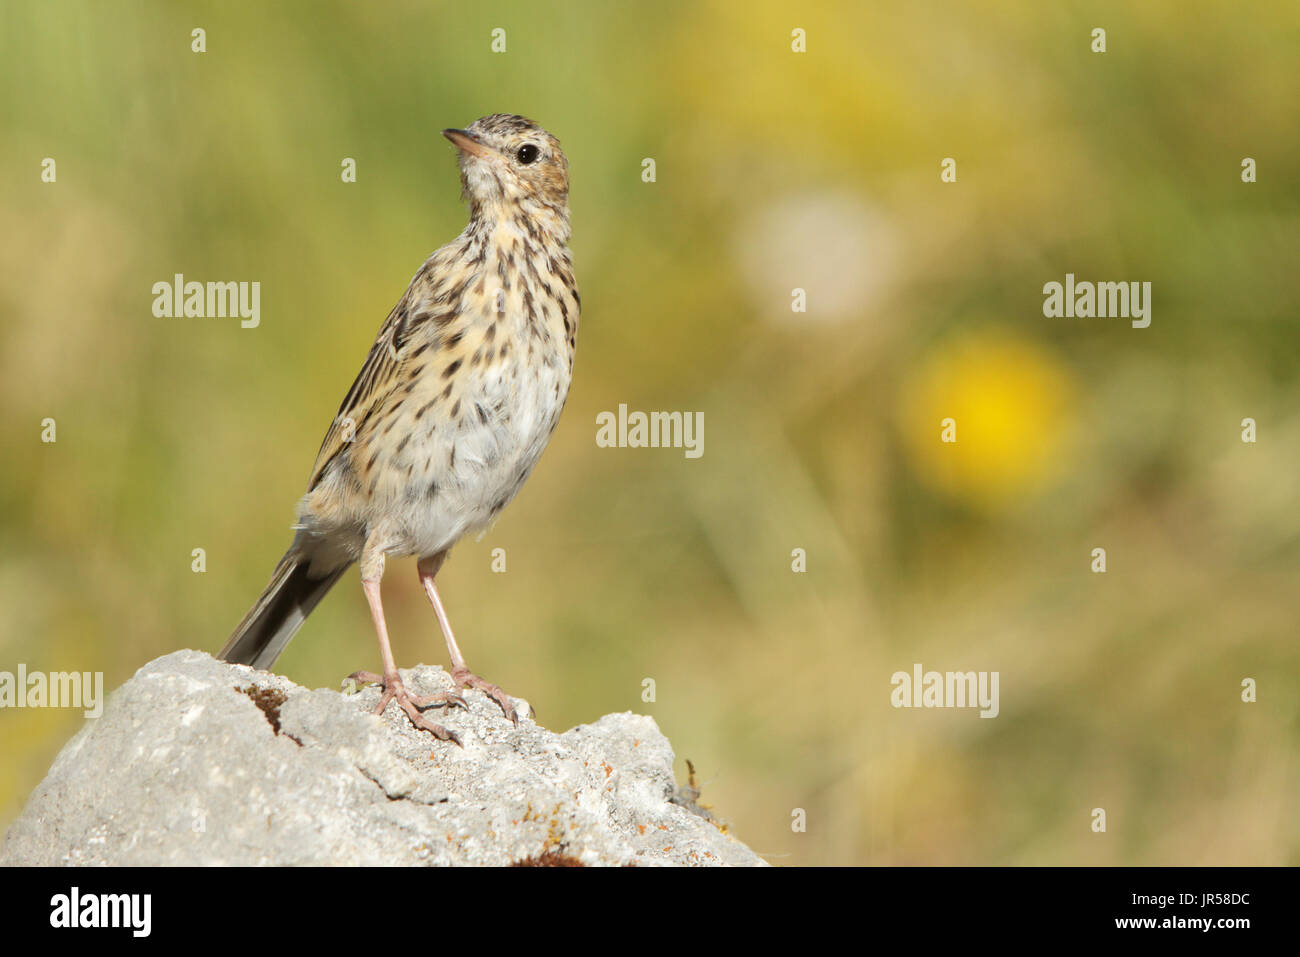 The tree pipit (Anthus trivialis) is a small passerine bird which breeds across most of Europe. It is a long-distance migrant Stock Photo